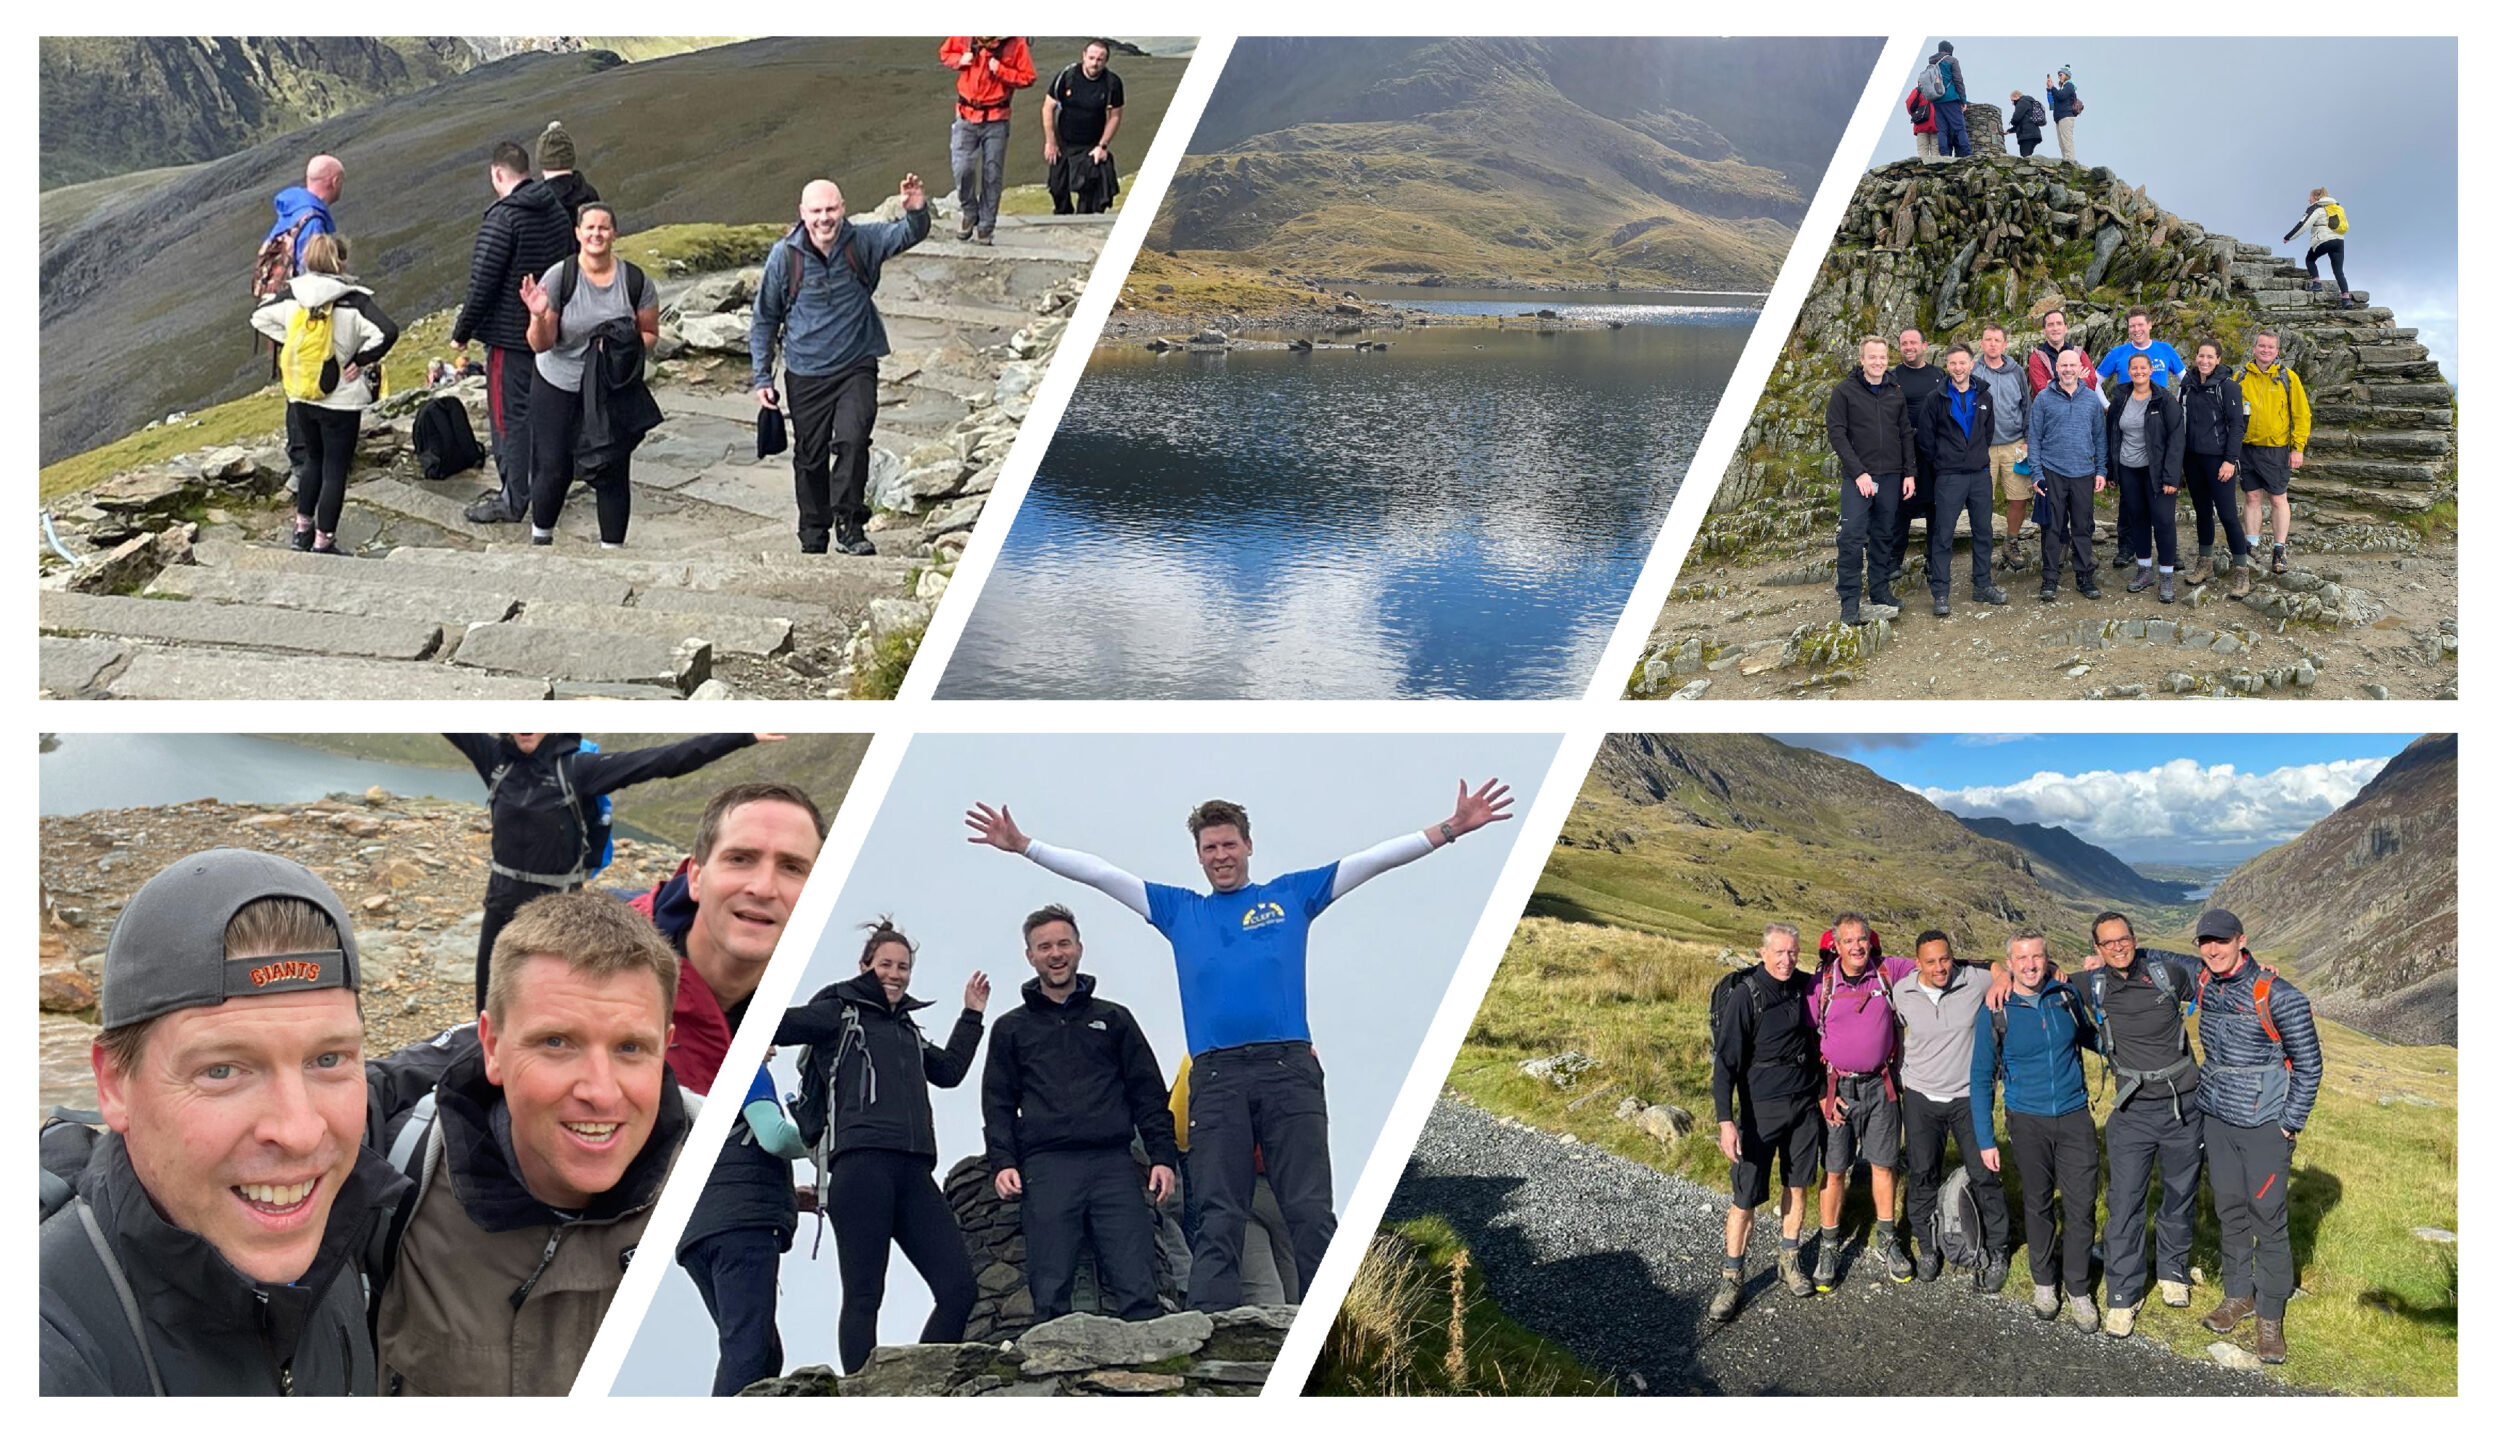 YFM team scales Snowdon for charity